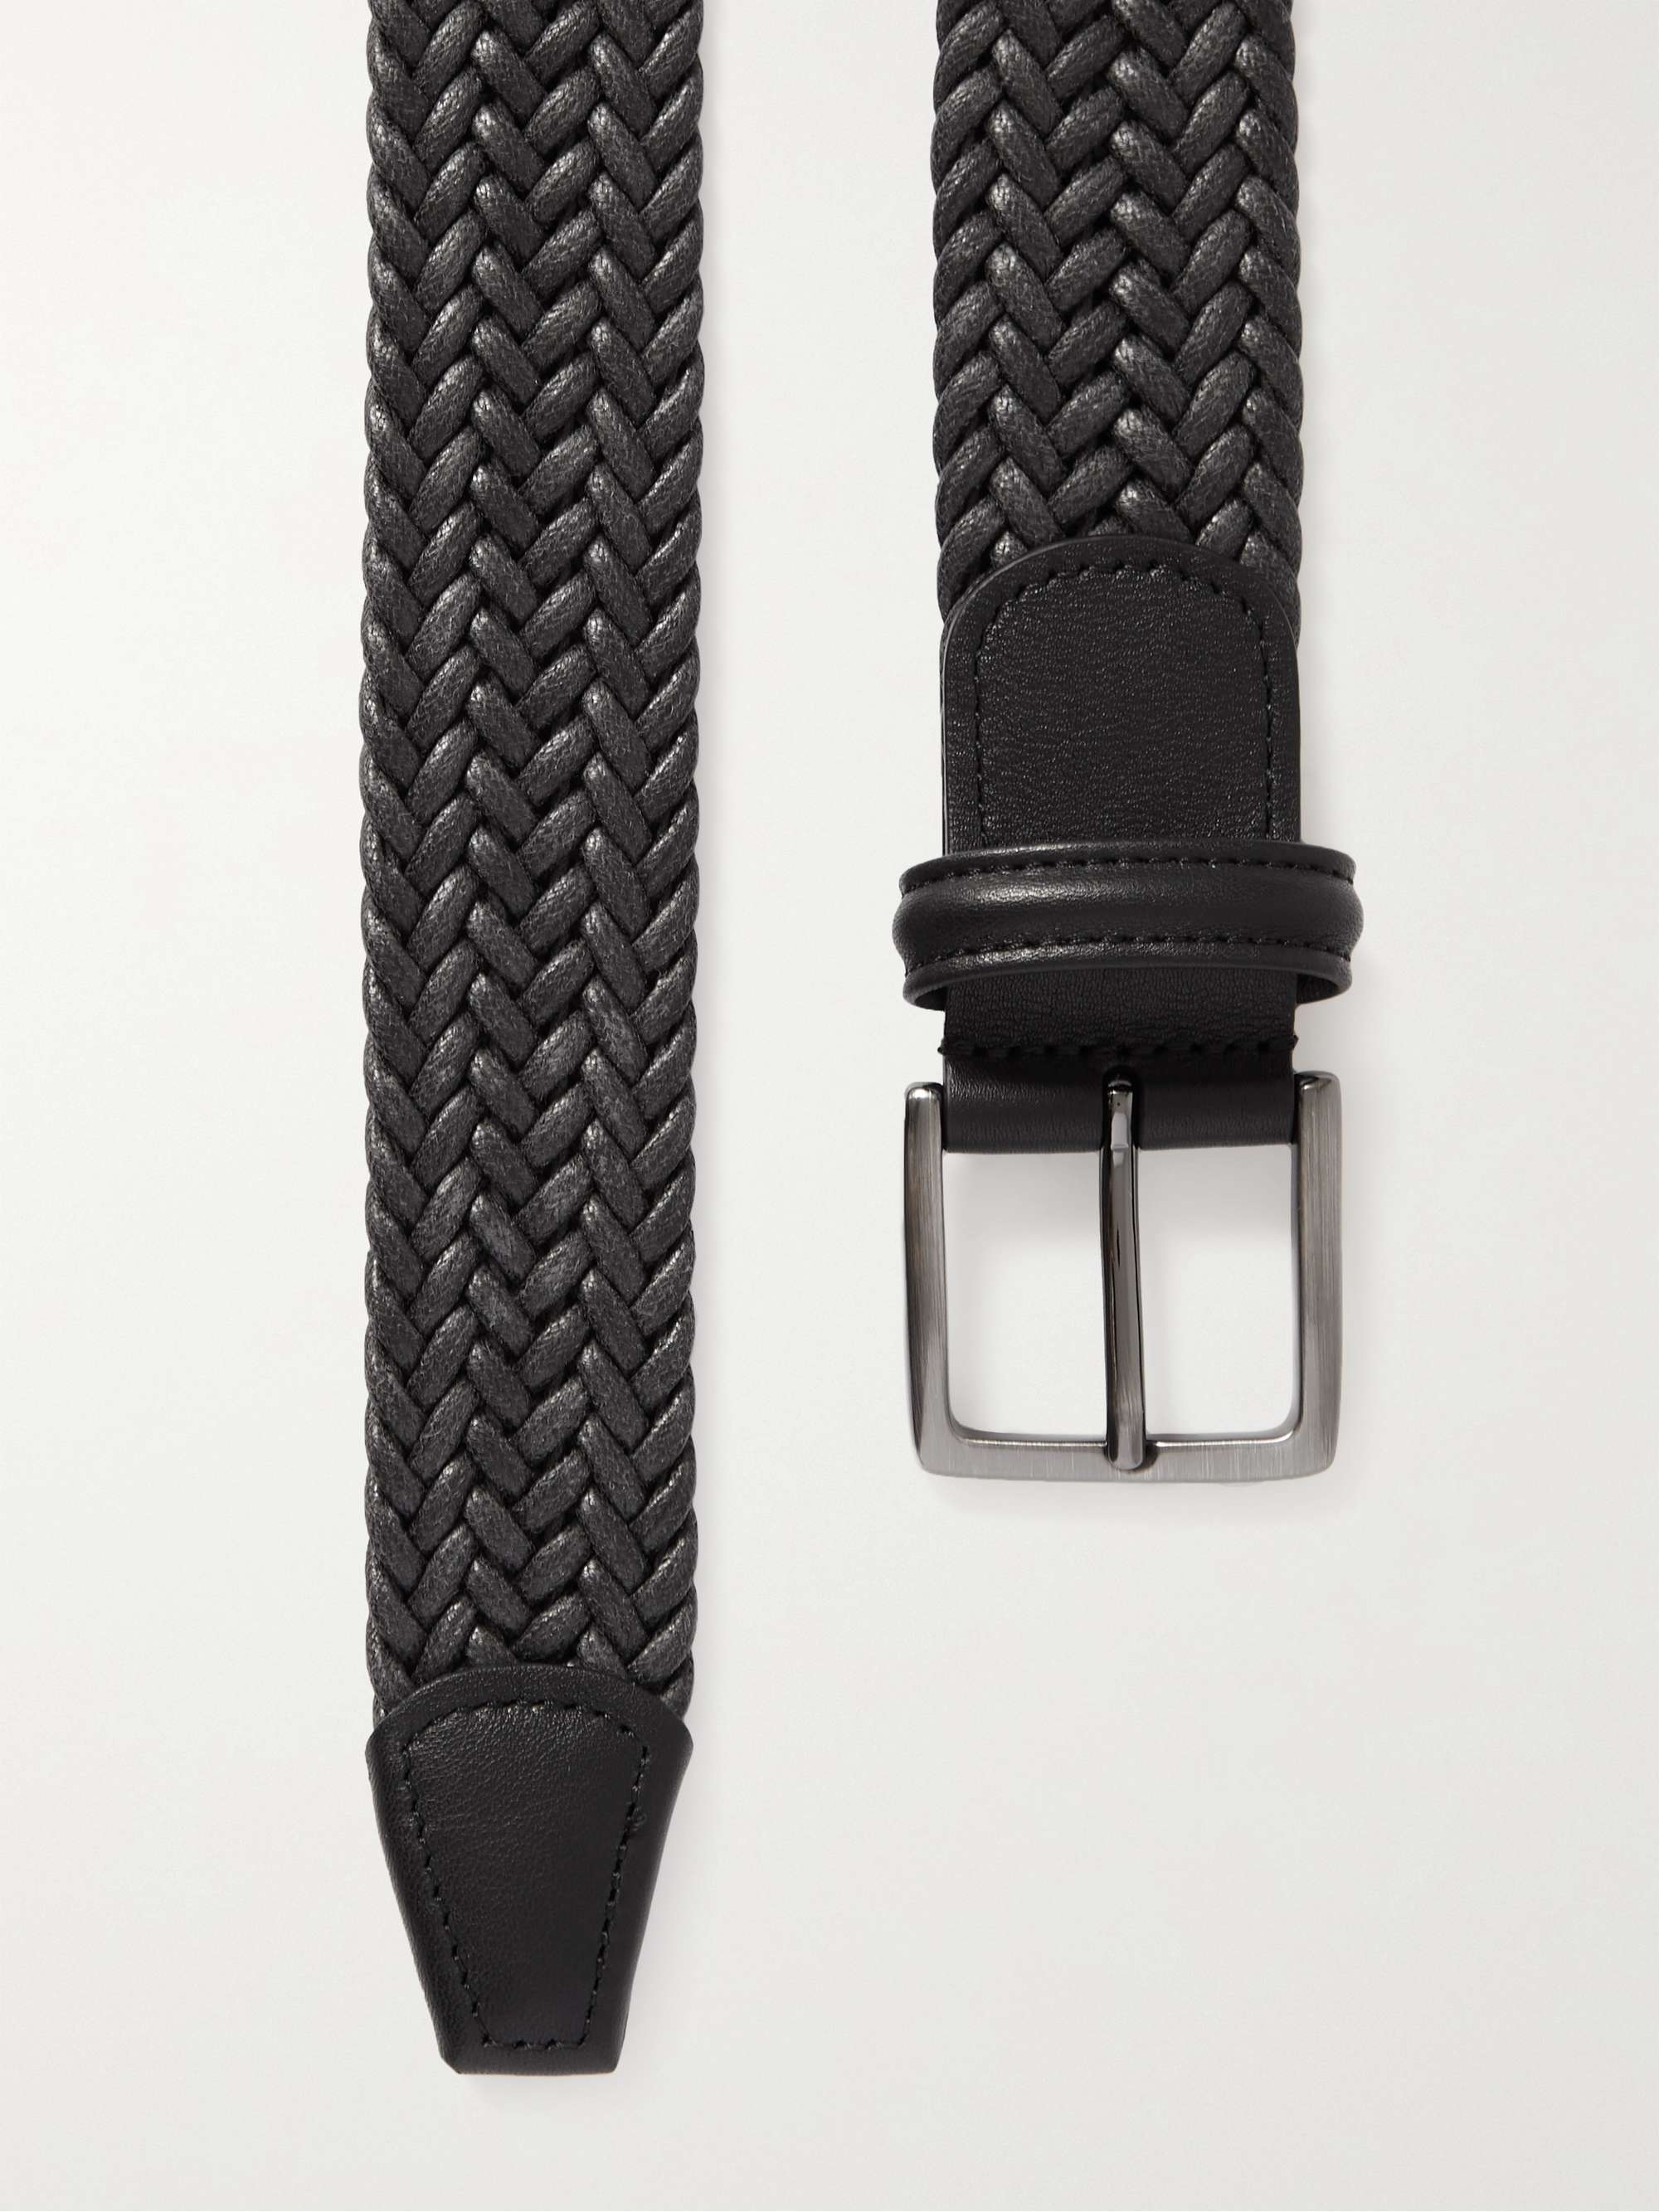 ANDERSON'S 3.5cm Leather-Trimmed Waxed-Cotton Woven Belt